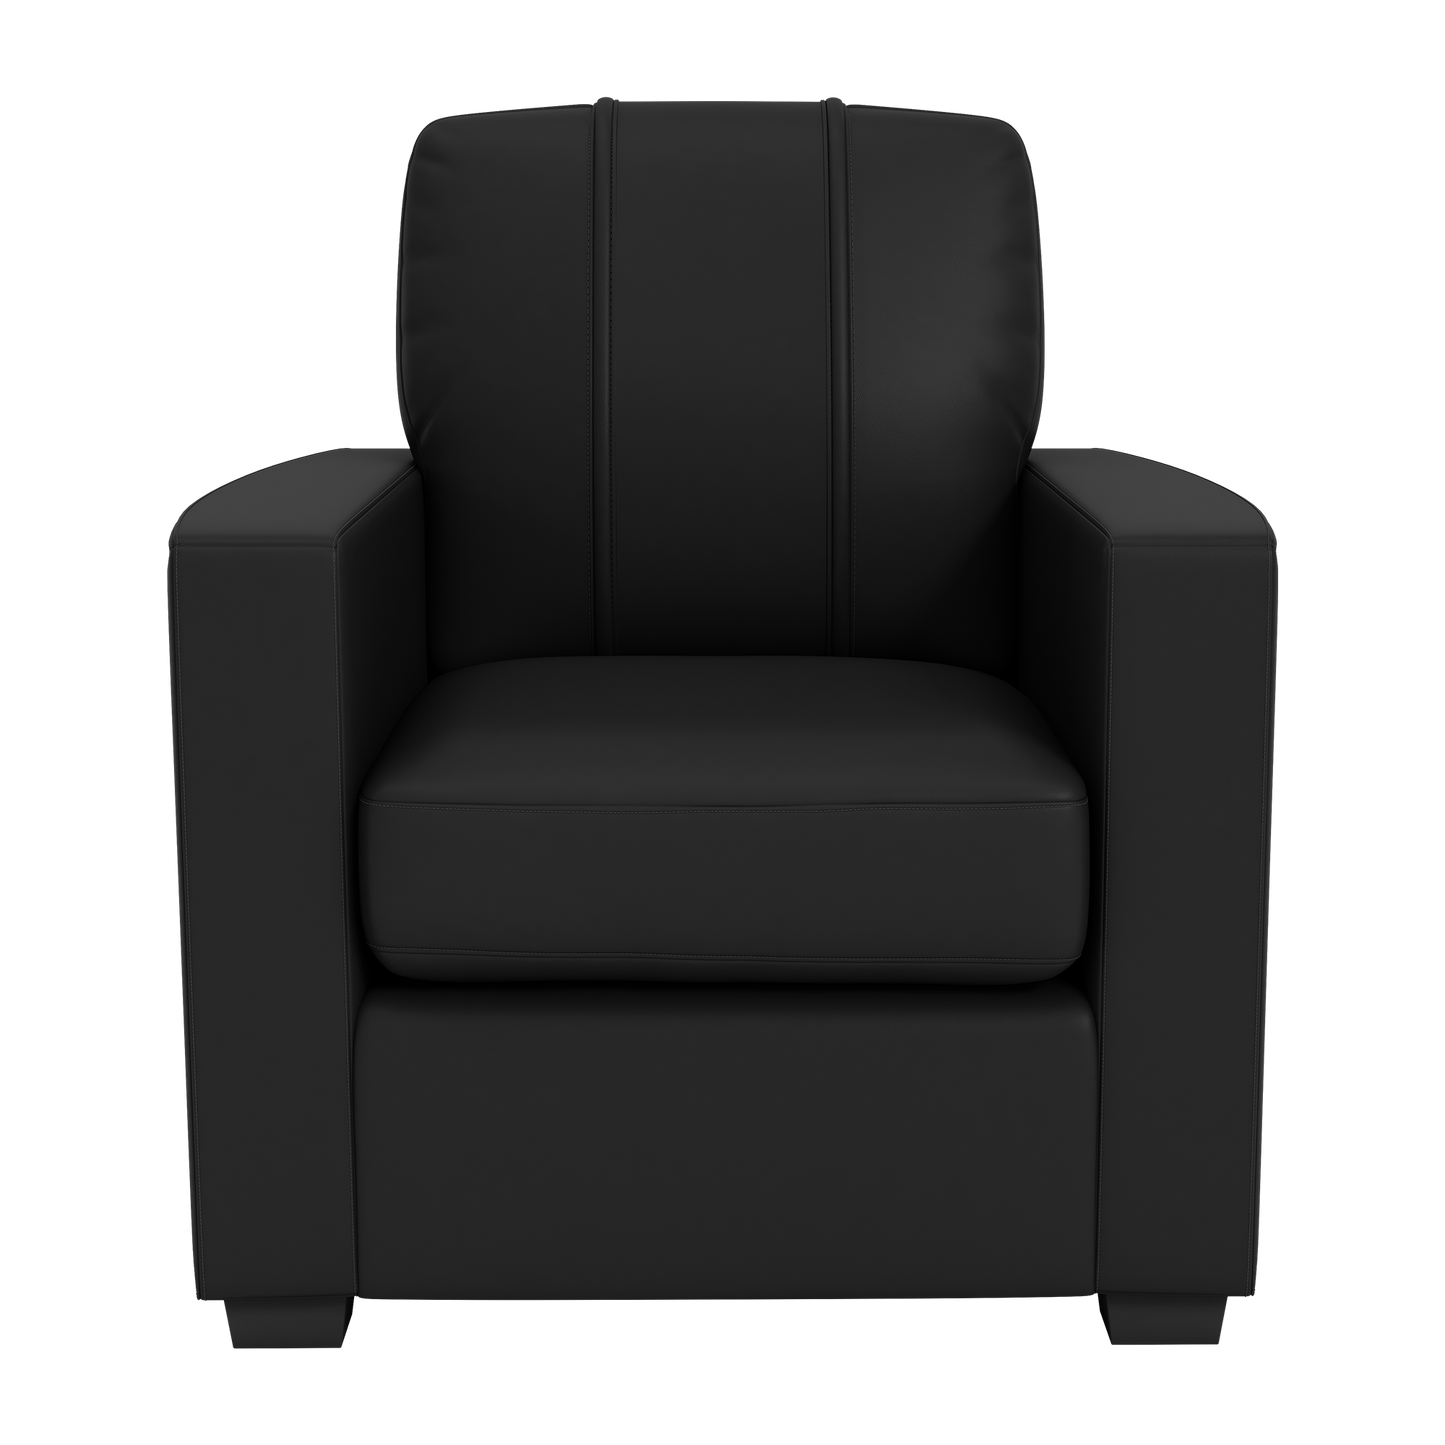 Silver Club Chair with Bored Apes Primary Logo